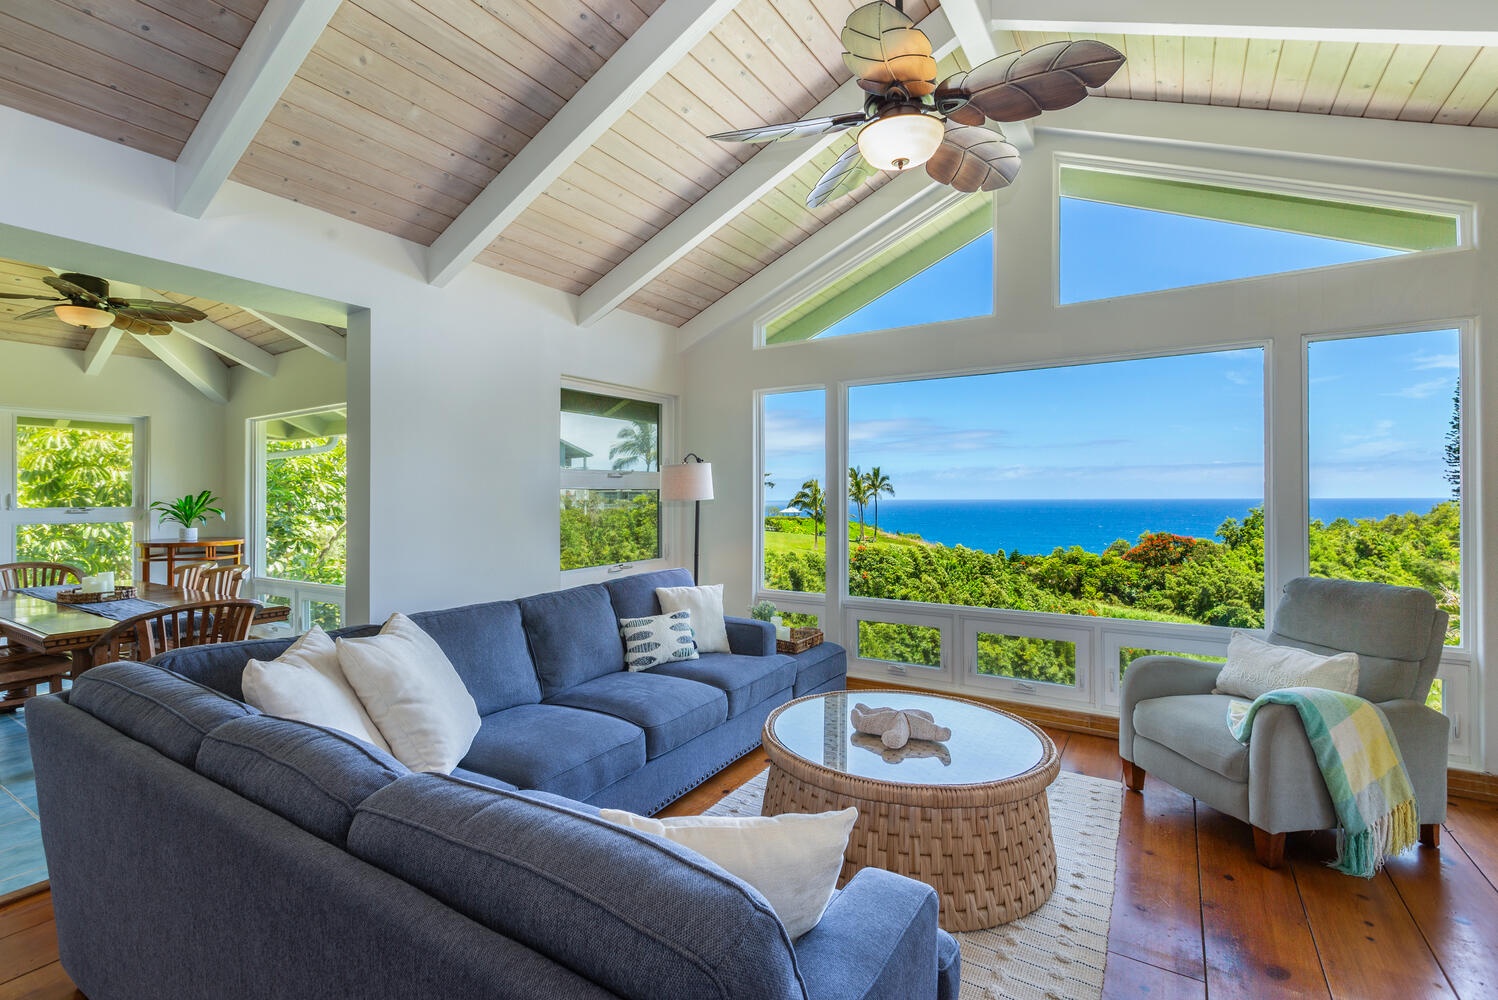 Princeville Vacation Rentals, Wai Lani - Enjoy the therapeutic calm of our spacious living area, where natural light adds a touch of serenity to every corner.